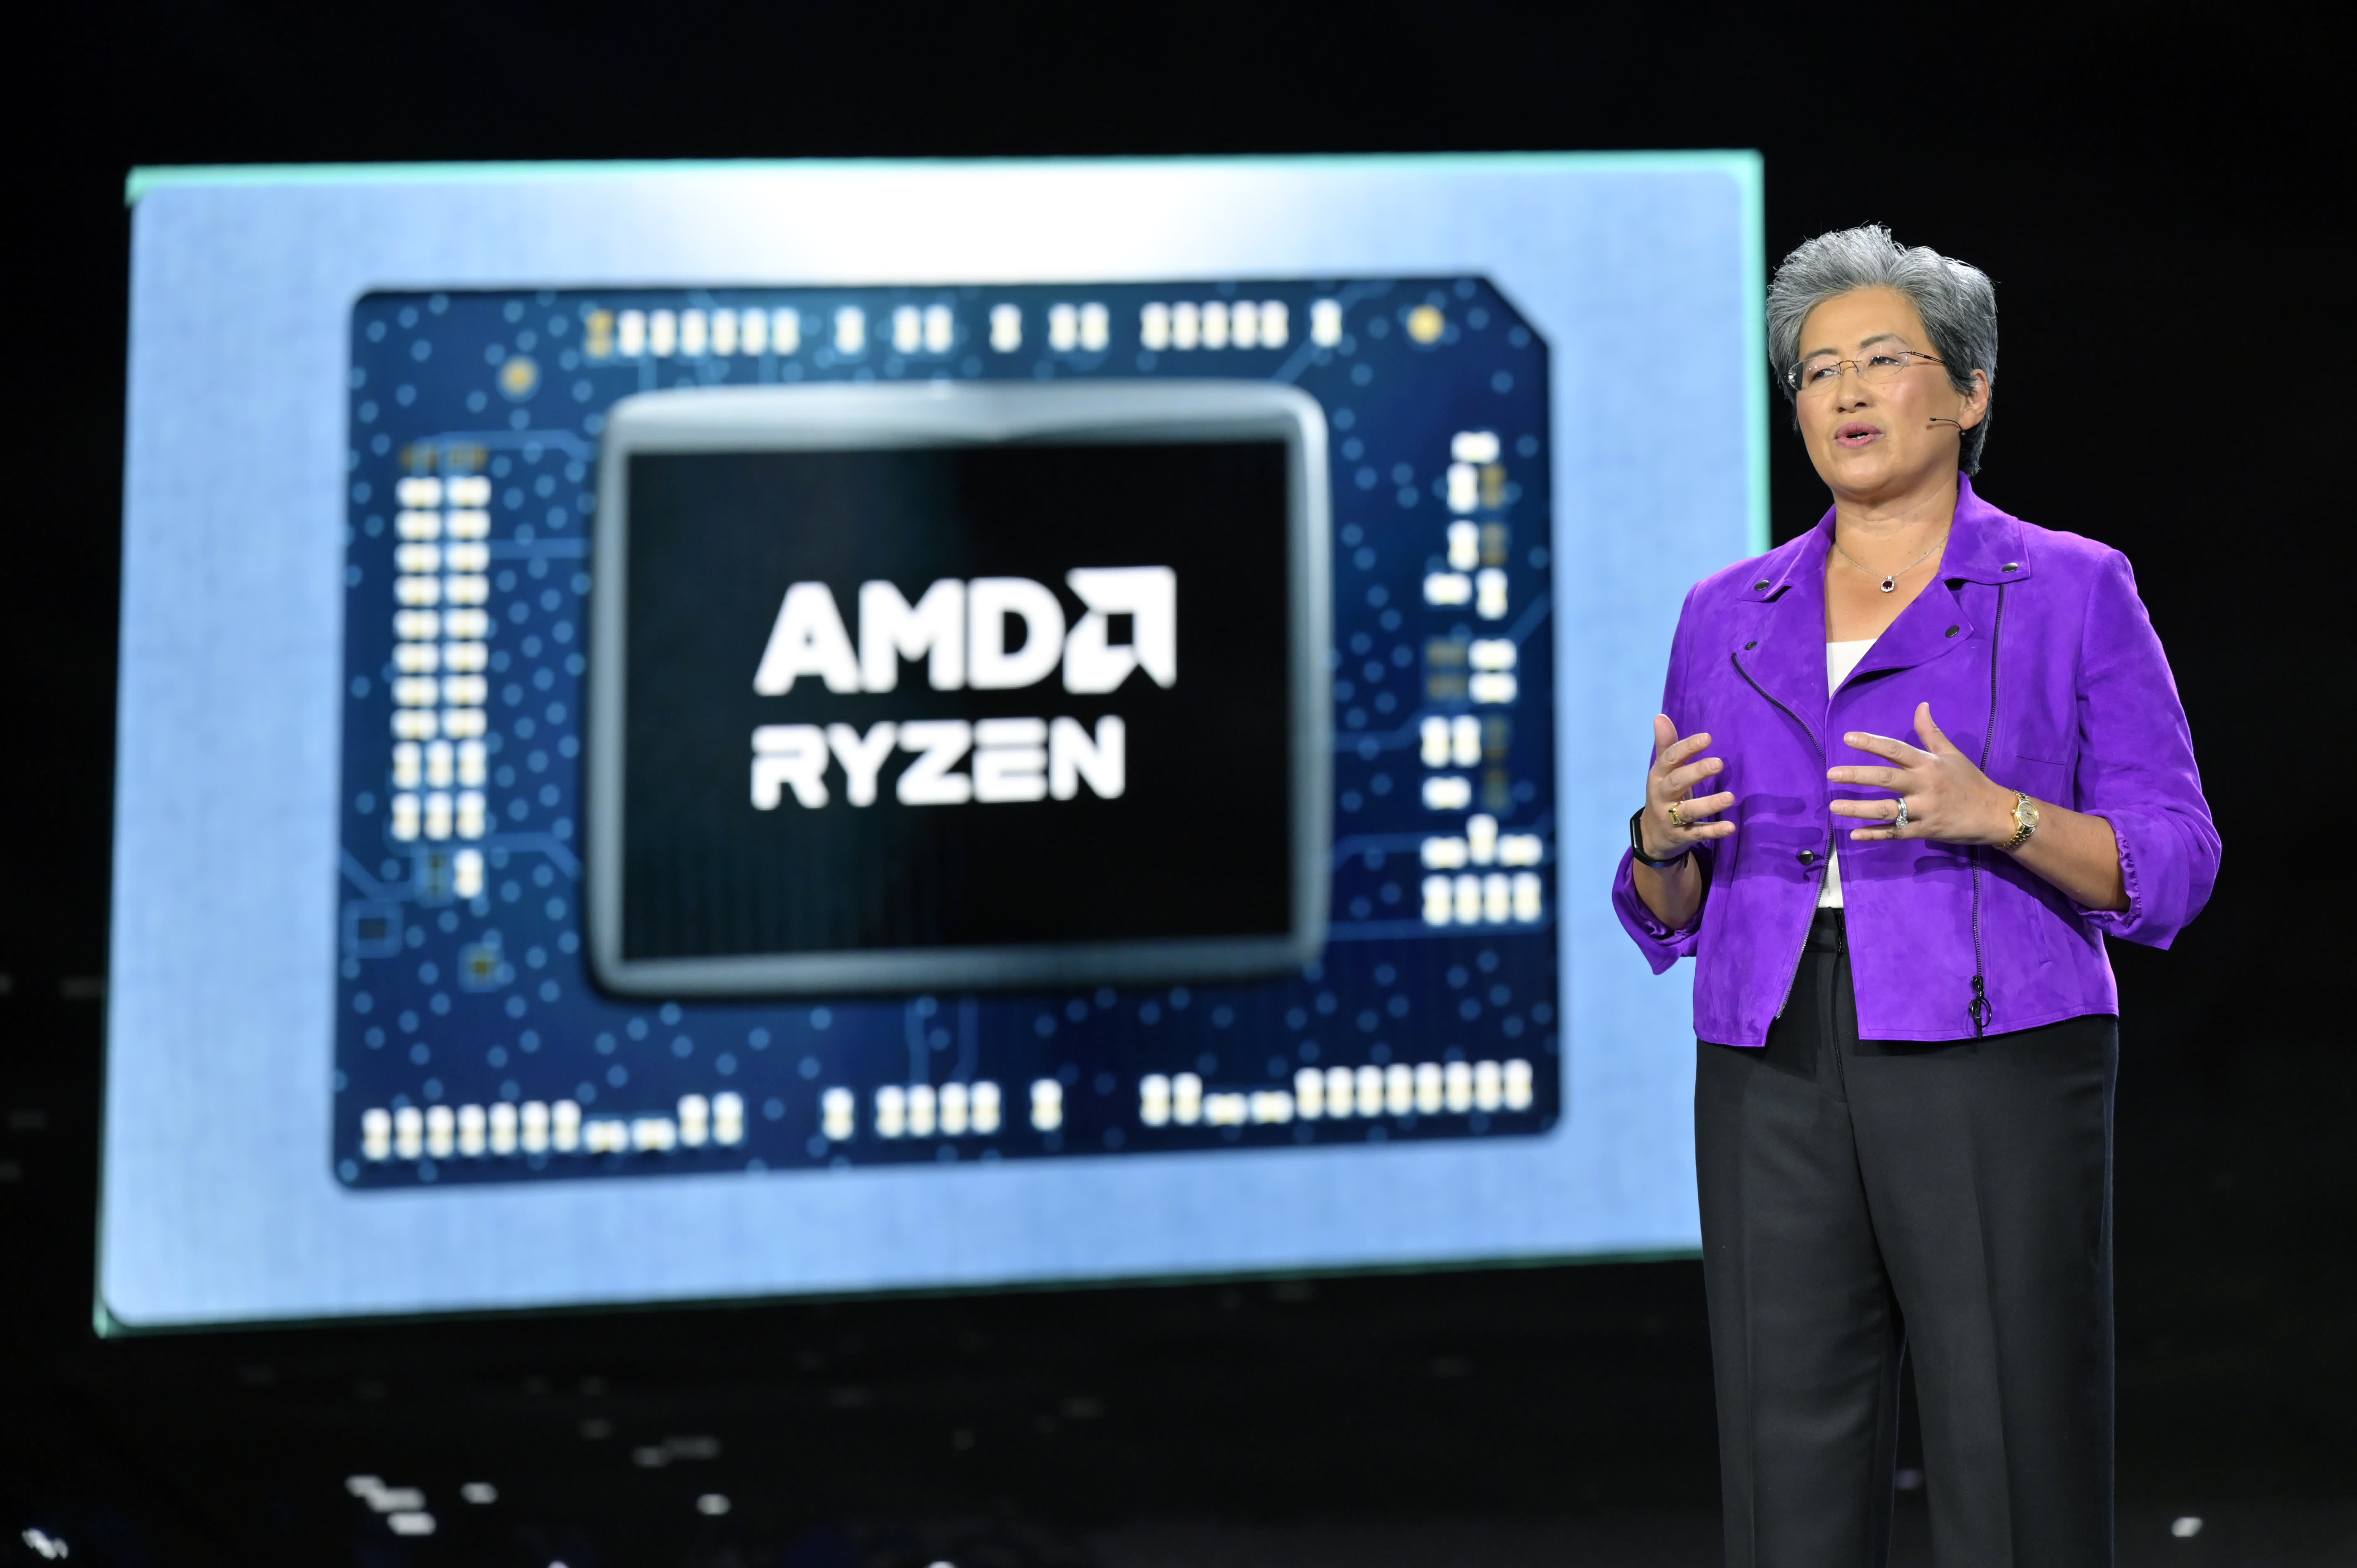 Wall Street wants to see if AMD can rebound in 2 key businesses. But analysts disagree on how to play the stock